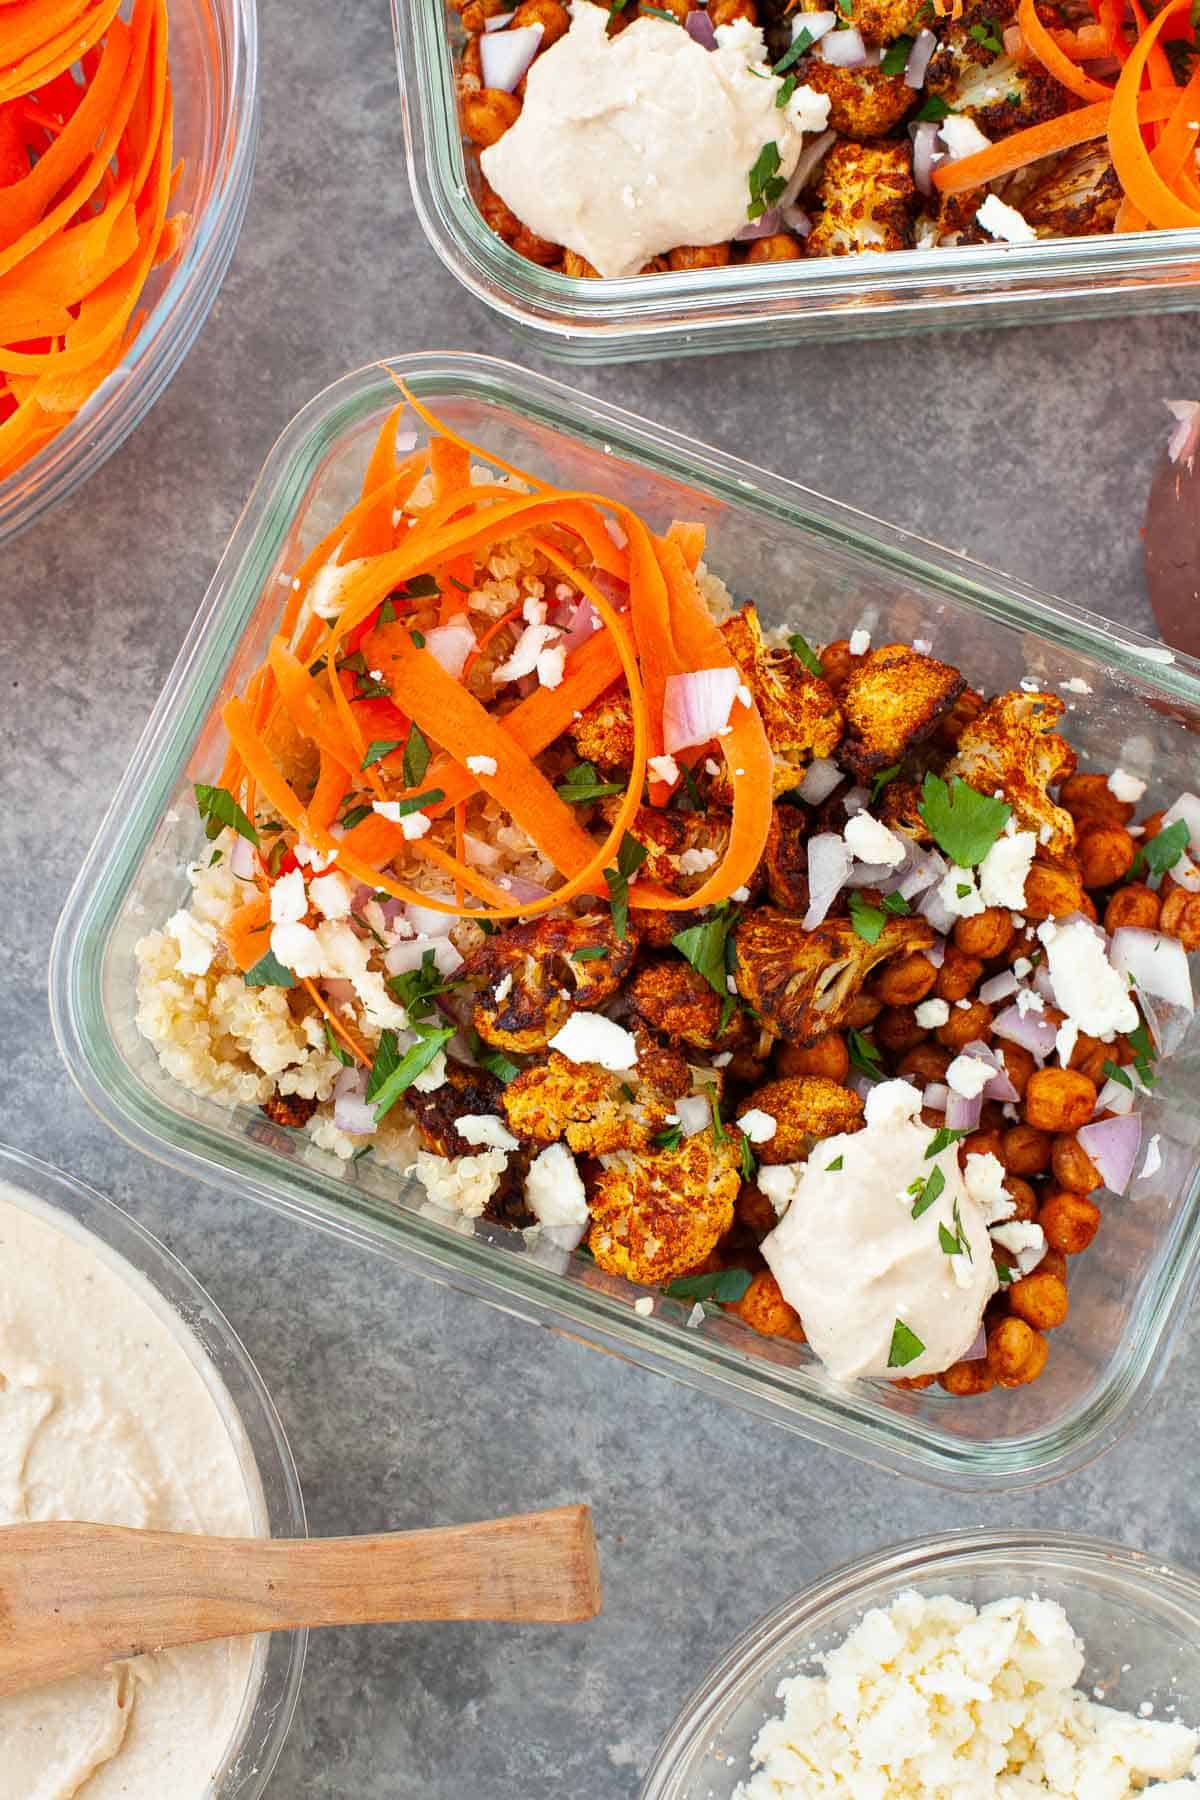 Moroccan Chickpea ingredients placed in a glass container for a satisfying meal prep lunch